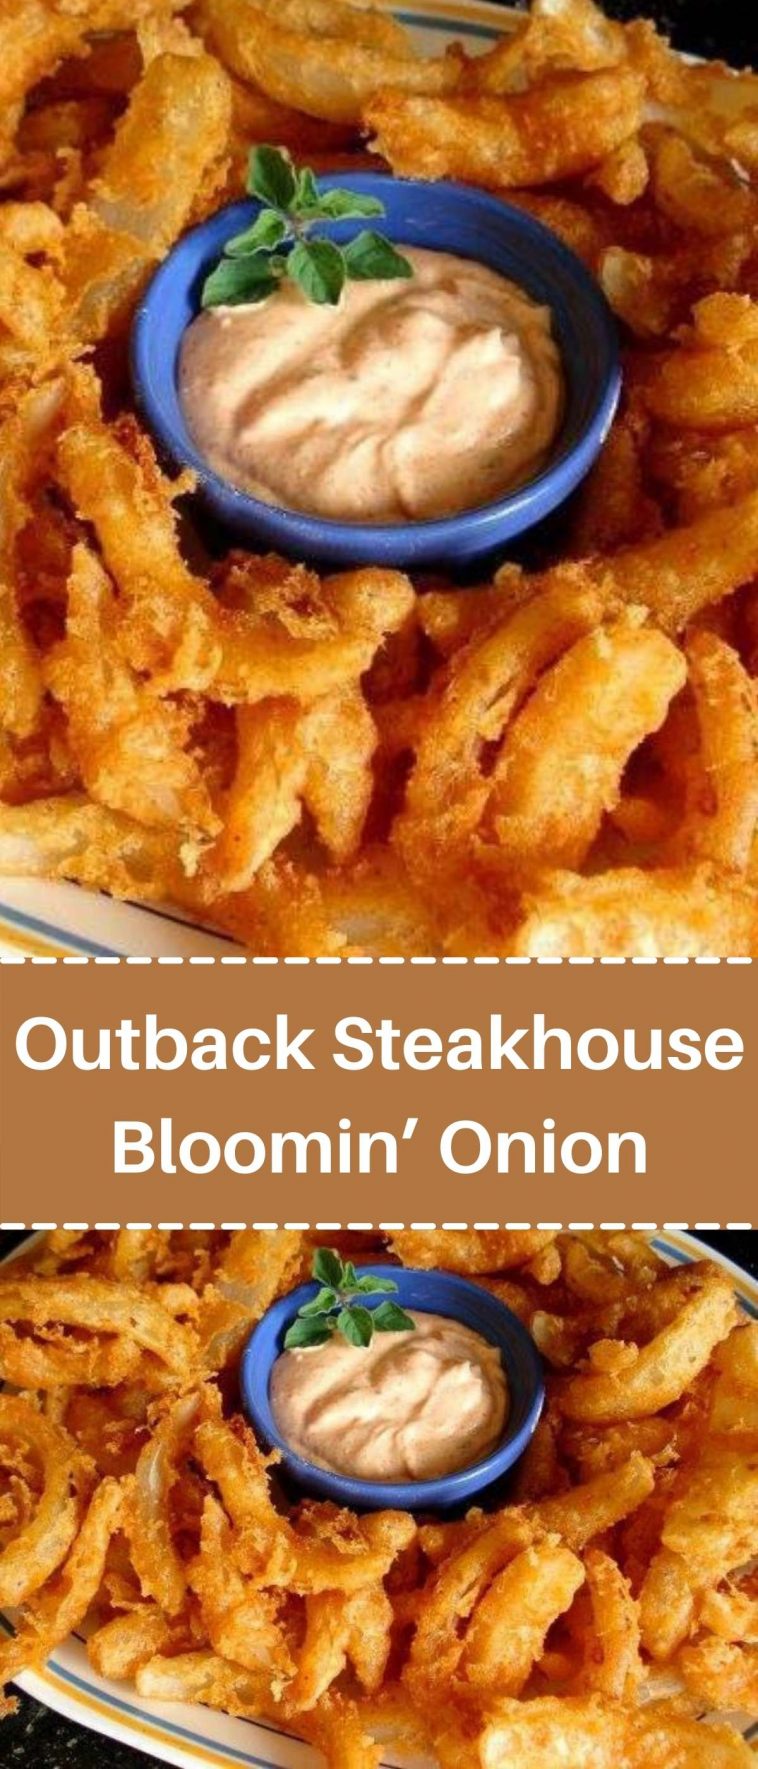 Outback Steakhouse Bloomin’ Onion